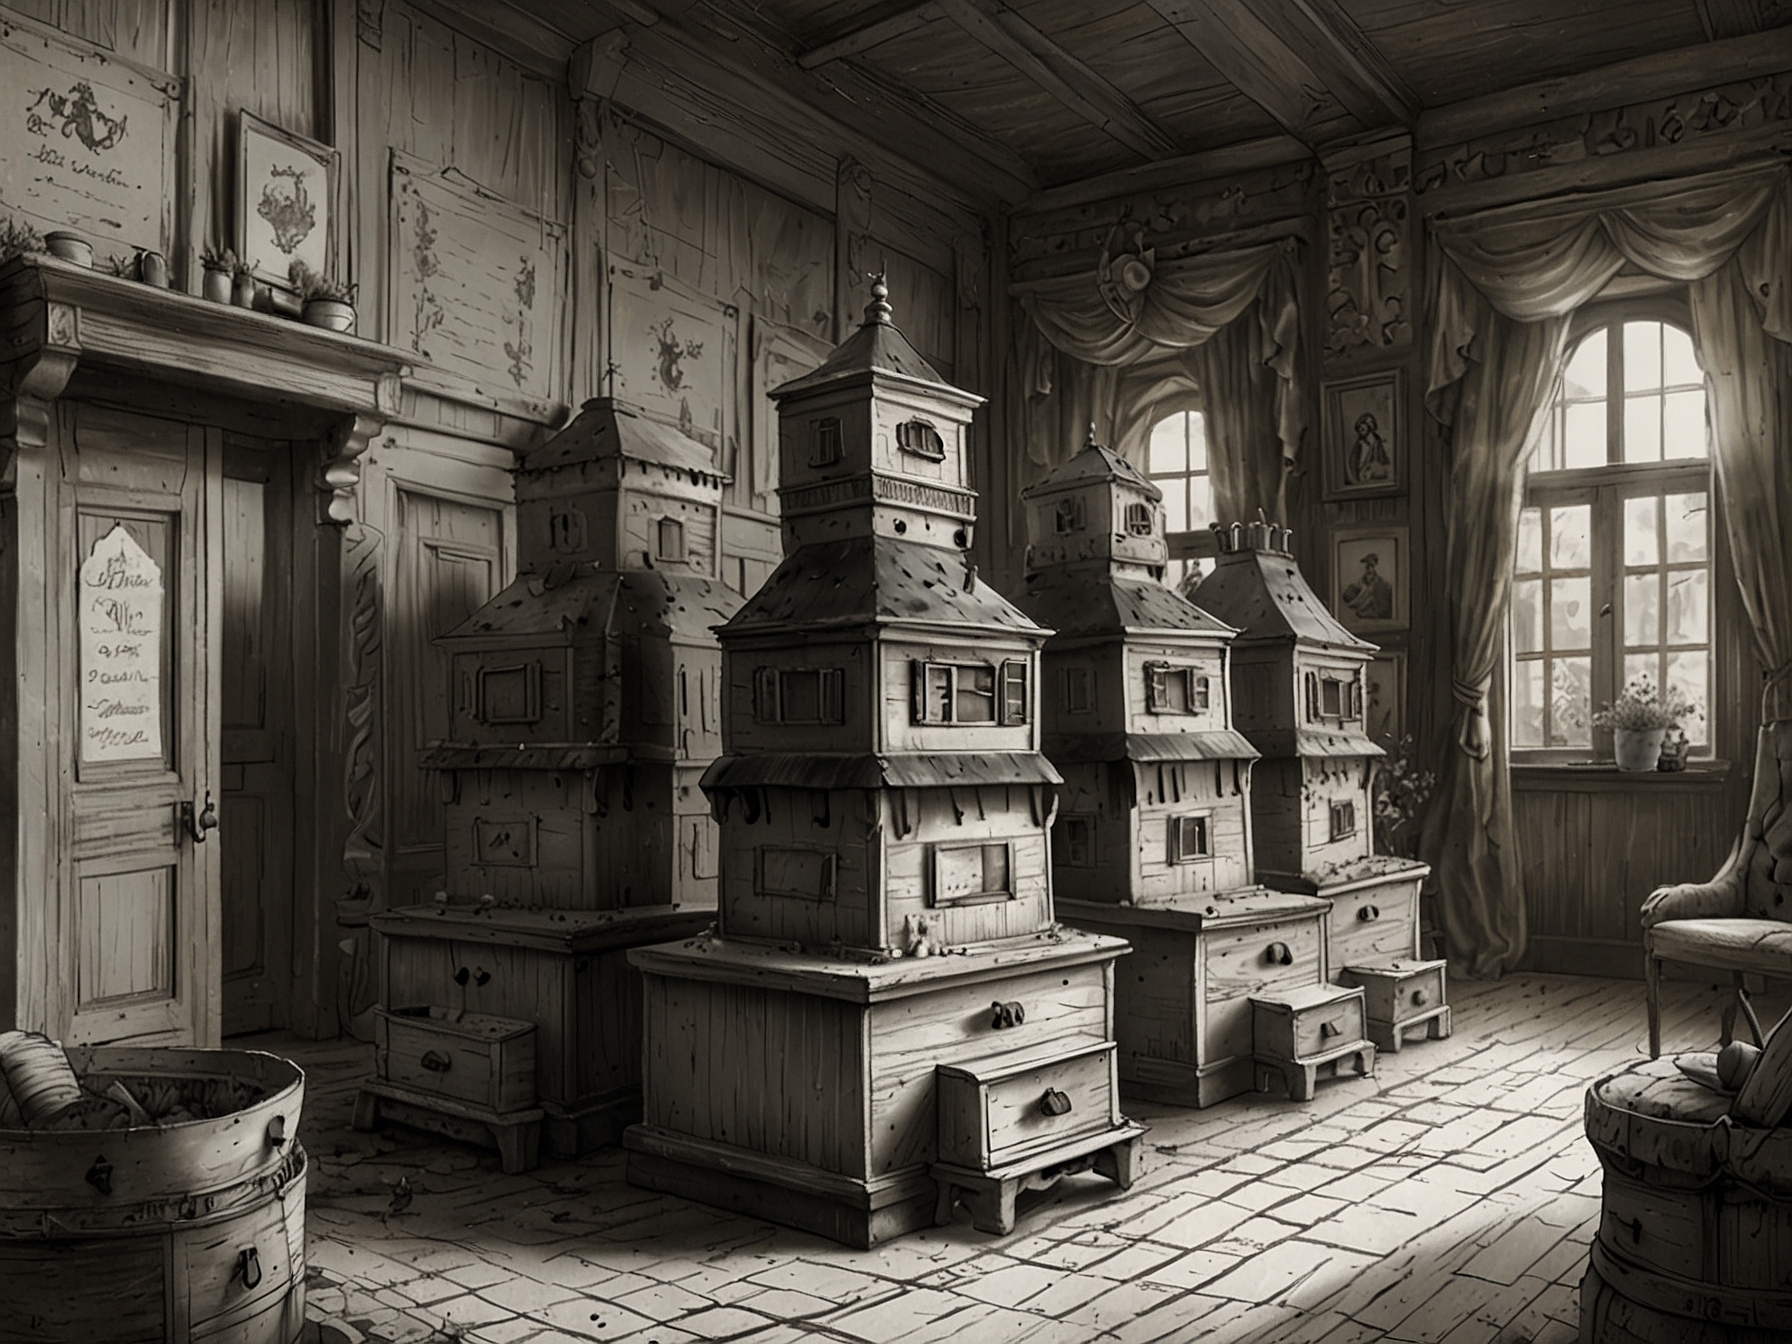 A detailed set design showing the Bridgerton family home with symbolic beehives, reinforcing themes of family heritage and continuity noted by observant viewers.